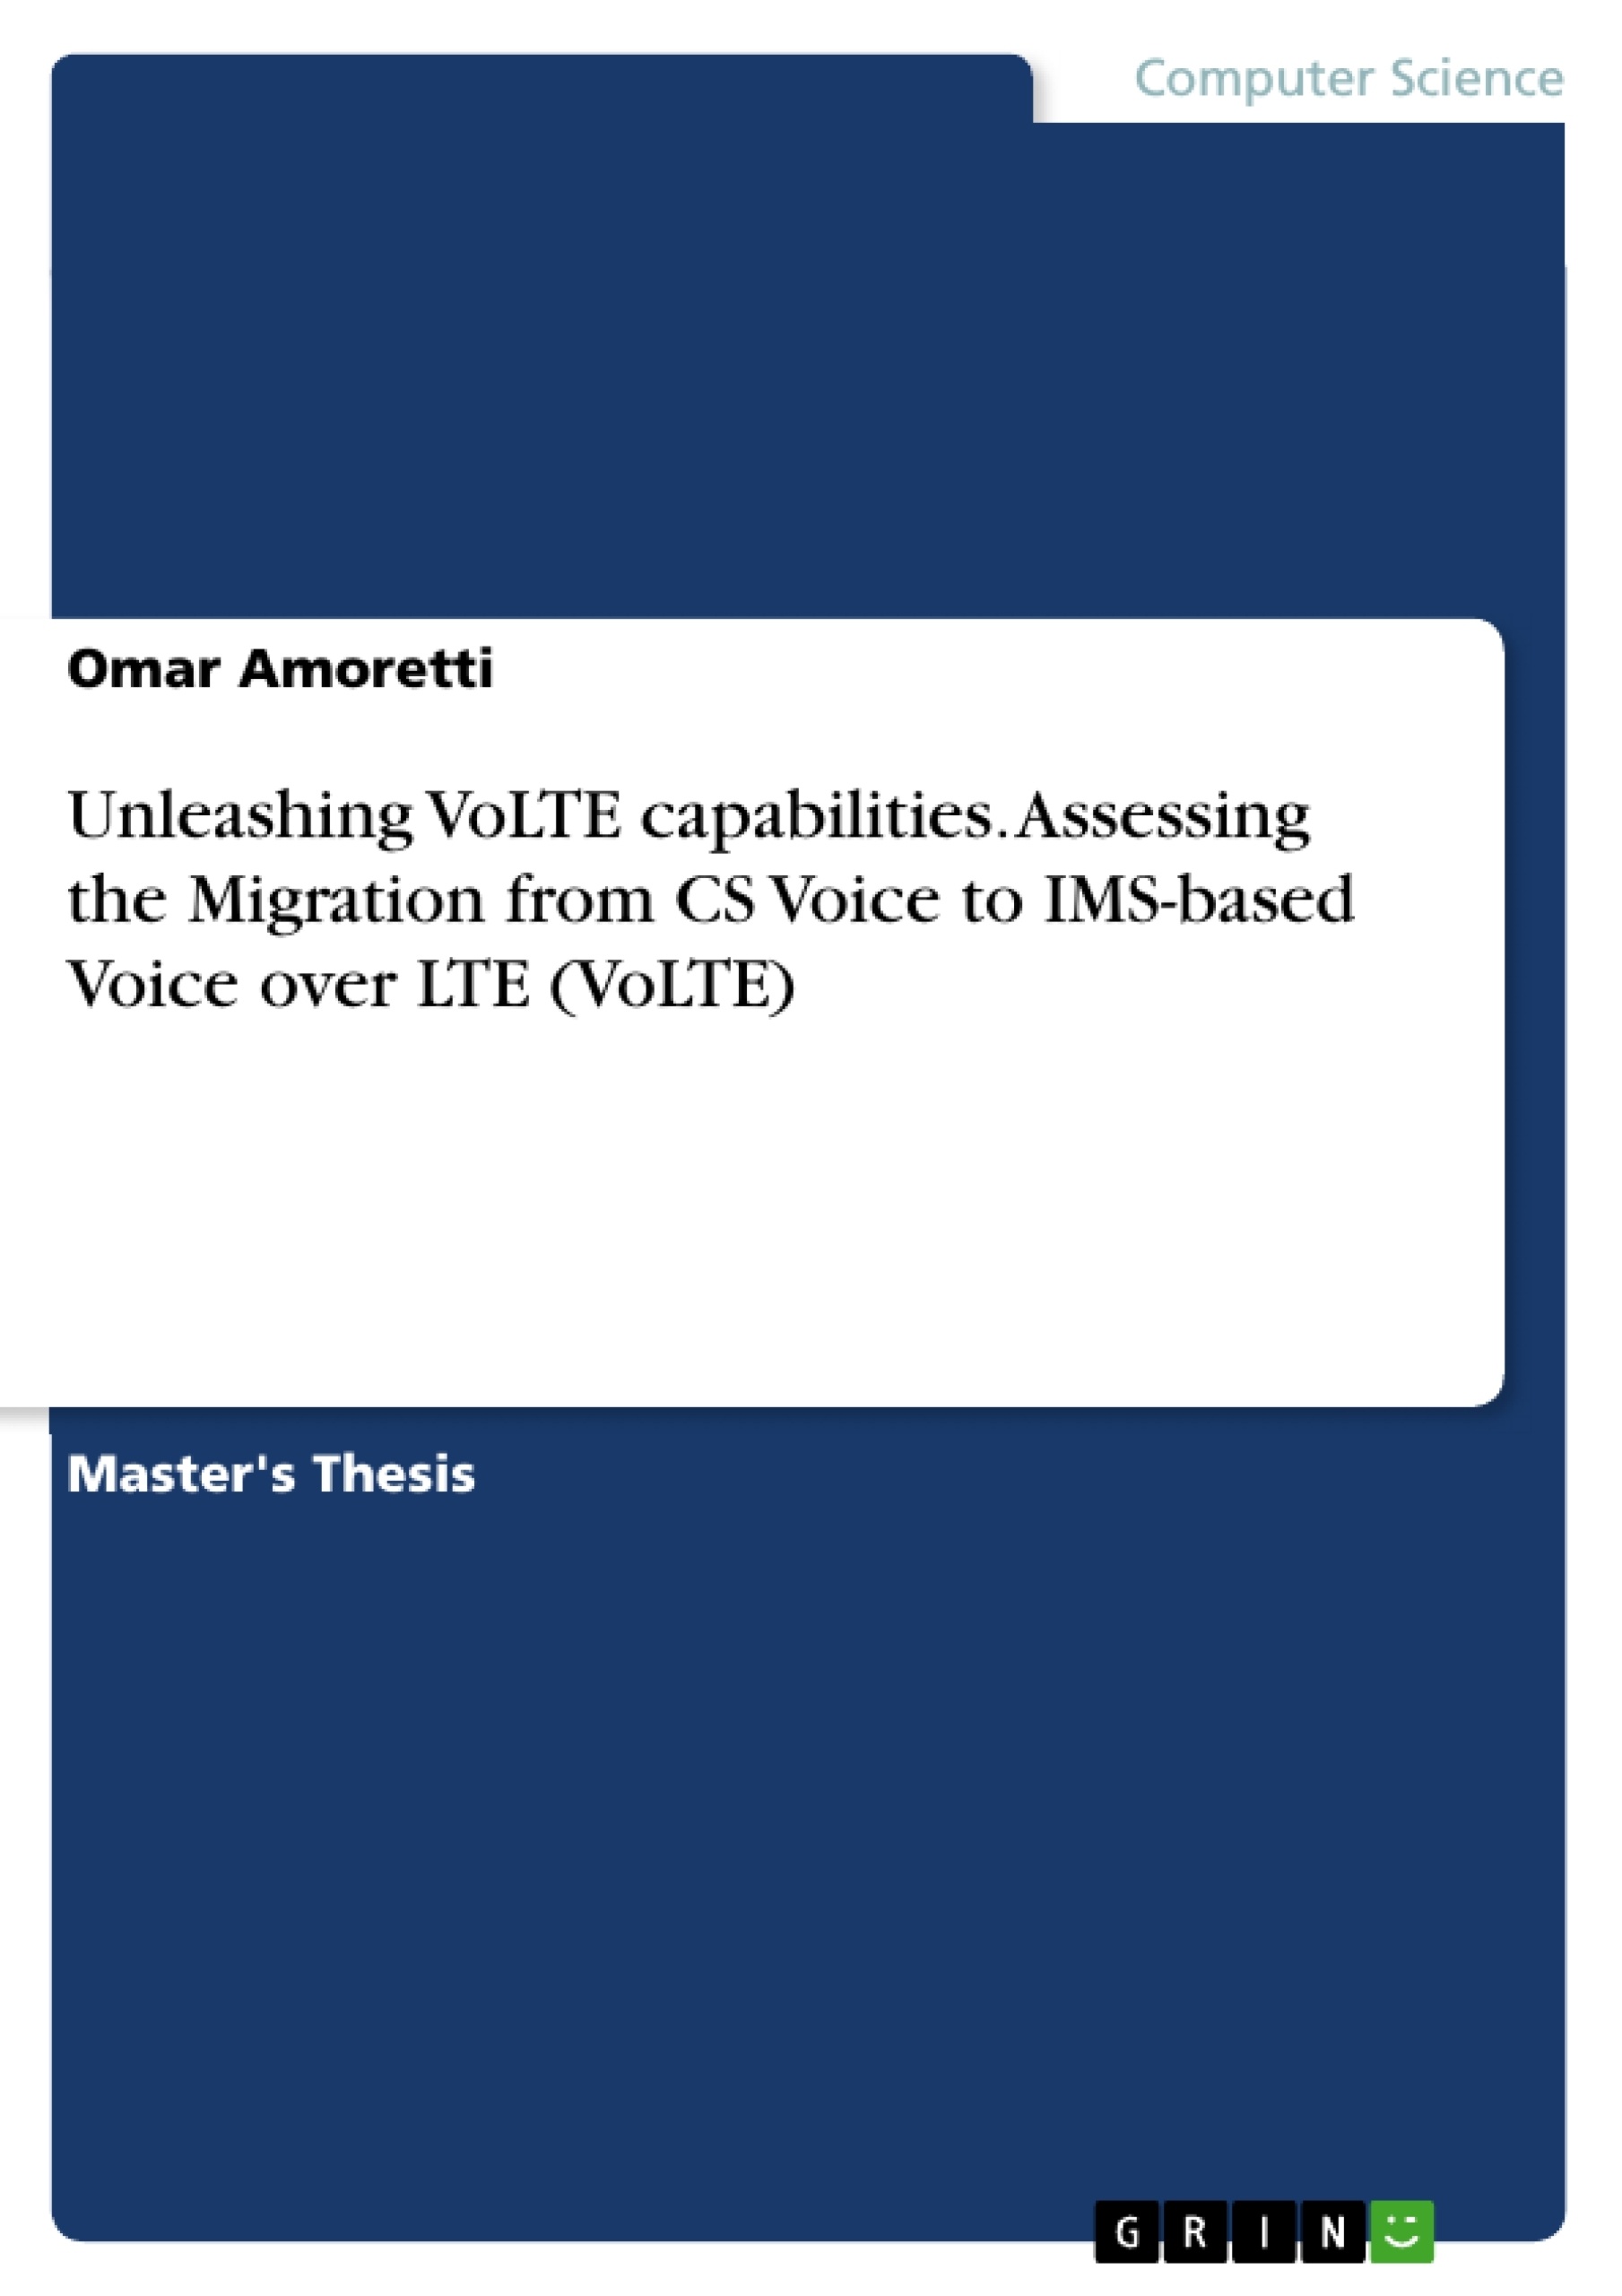 Title: Unleashing VoLTE capabilities. Assessing the Migration from CS Voice to IMS-based Voice over LTE (VoLTE)